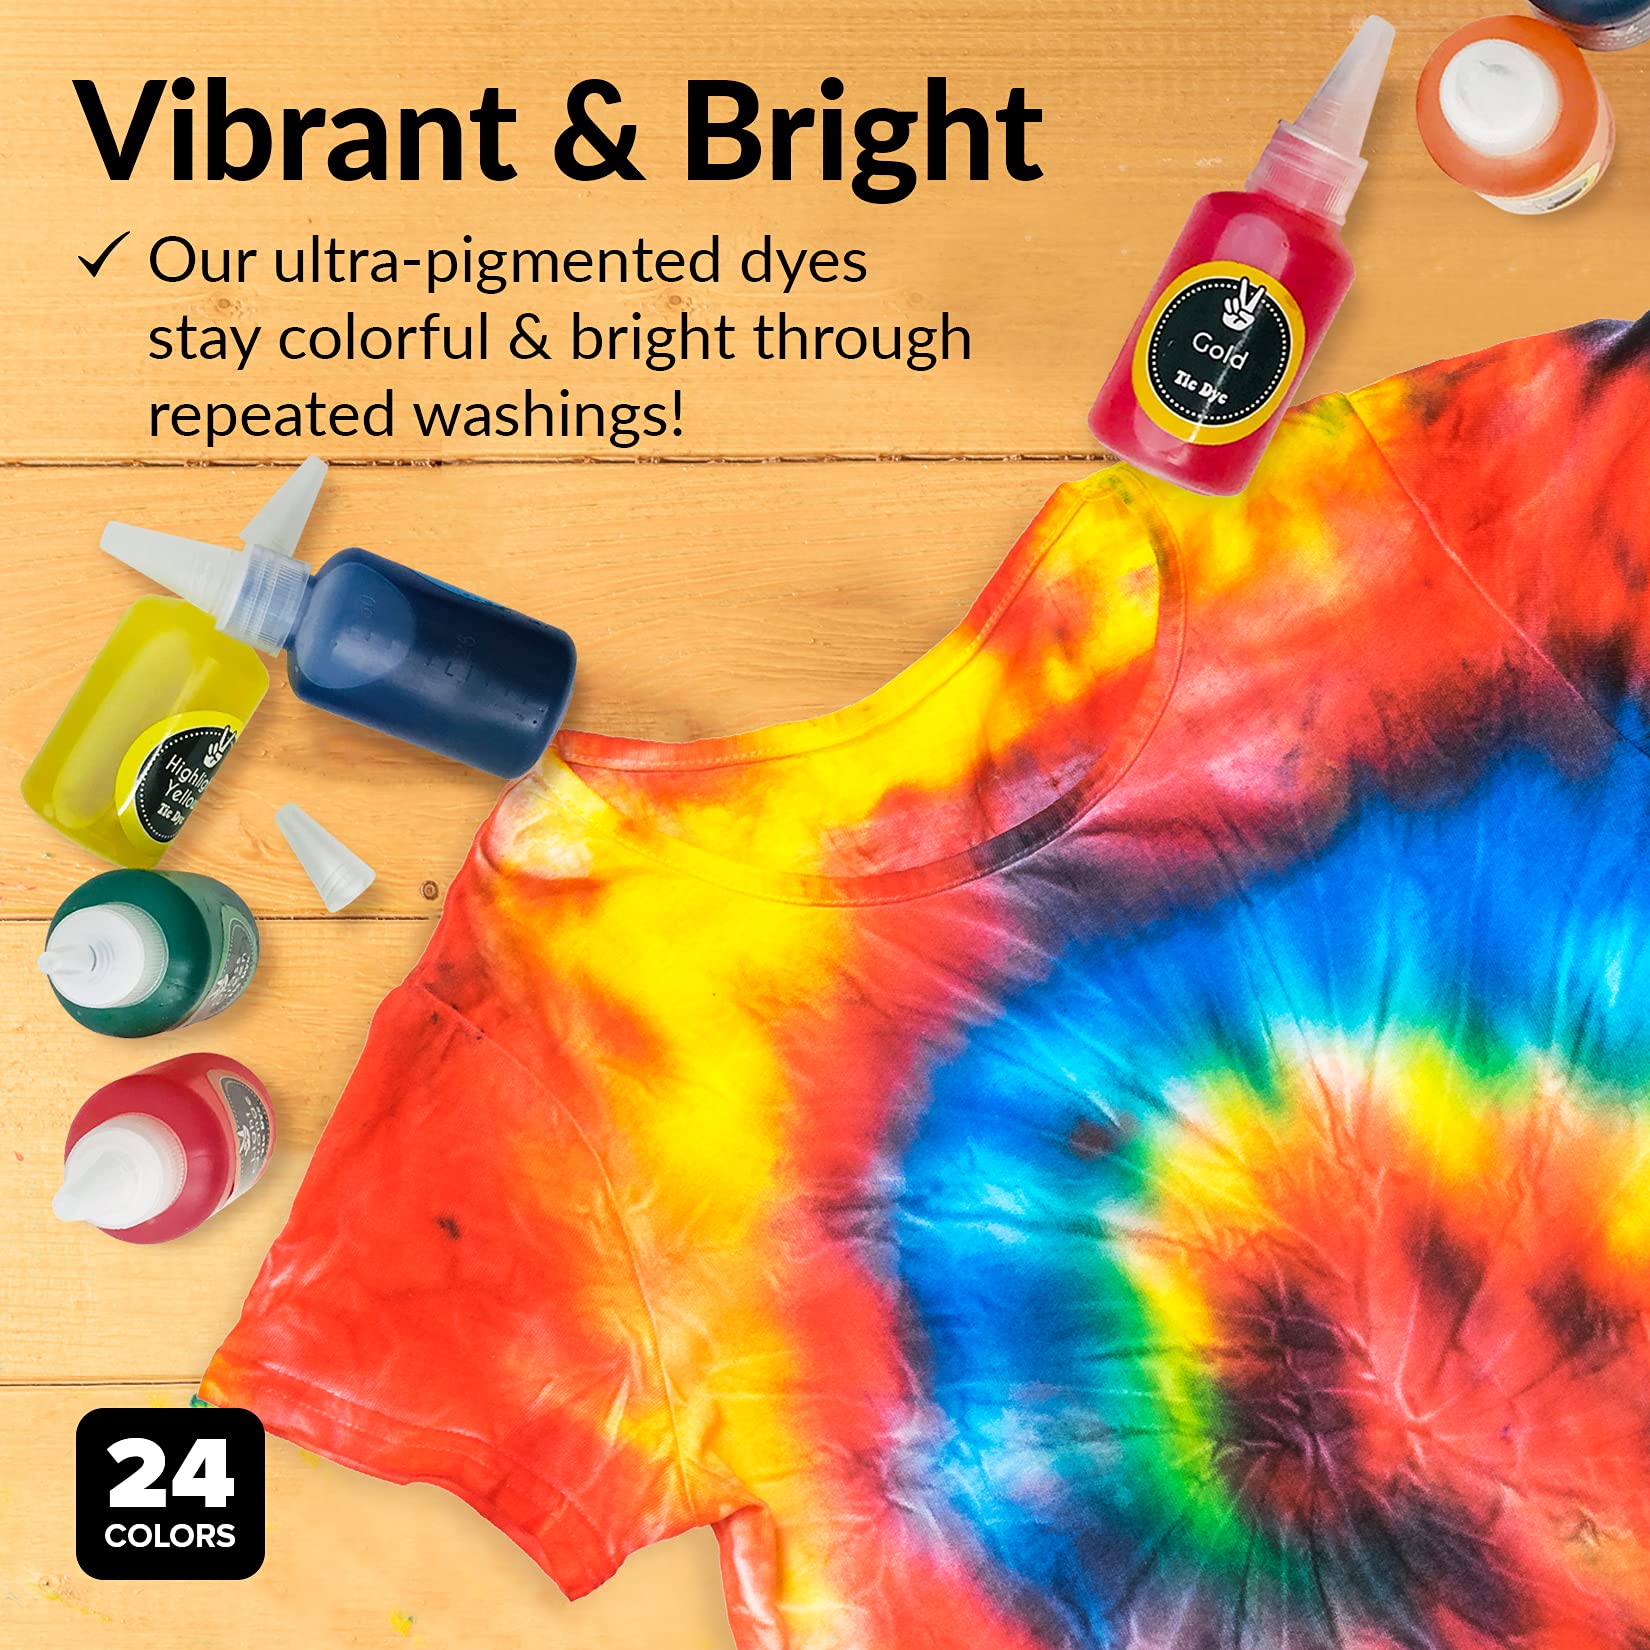 Tie Dye Kit for Kids and Adults - Easy DIY Tie Dye Party Kit with 18  Colors, Fabric Dye Refills, Rubber Bands, Gloves, Table Cover + More  Supplies 